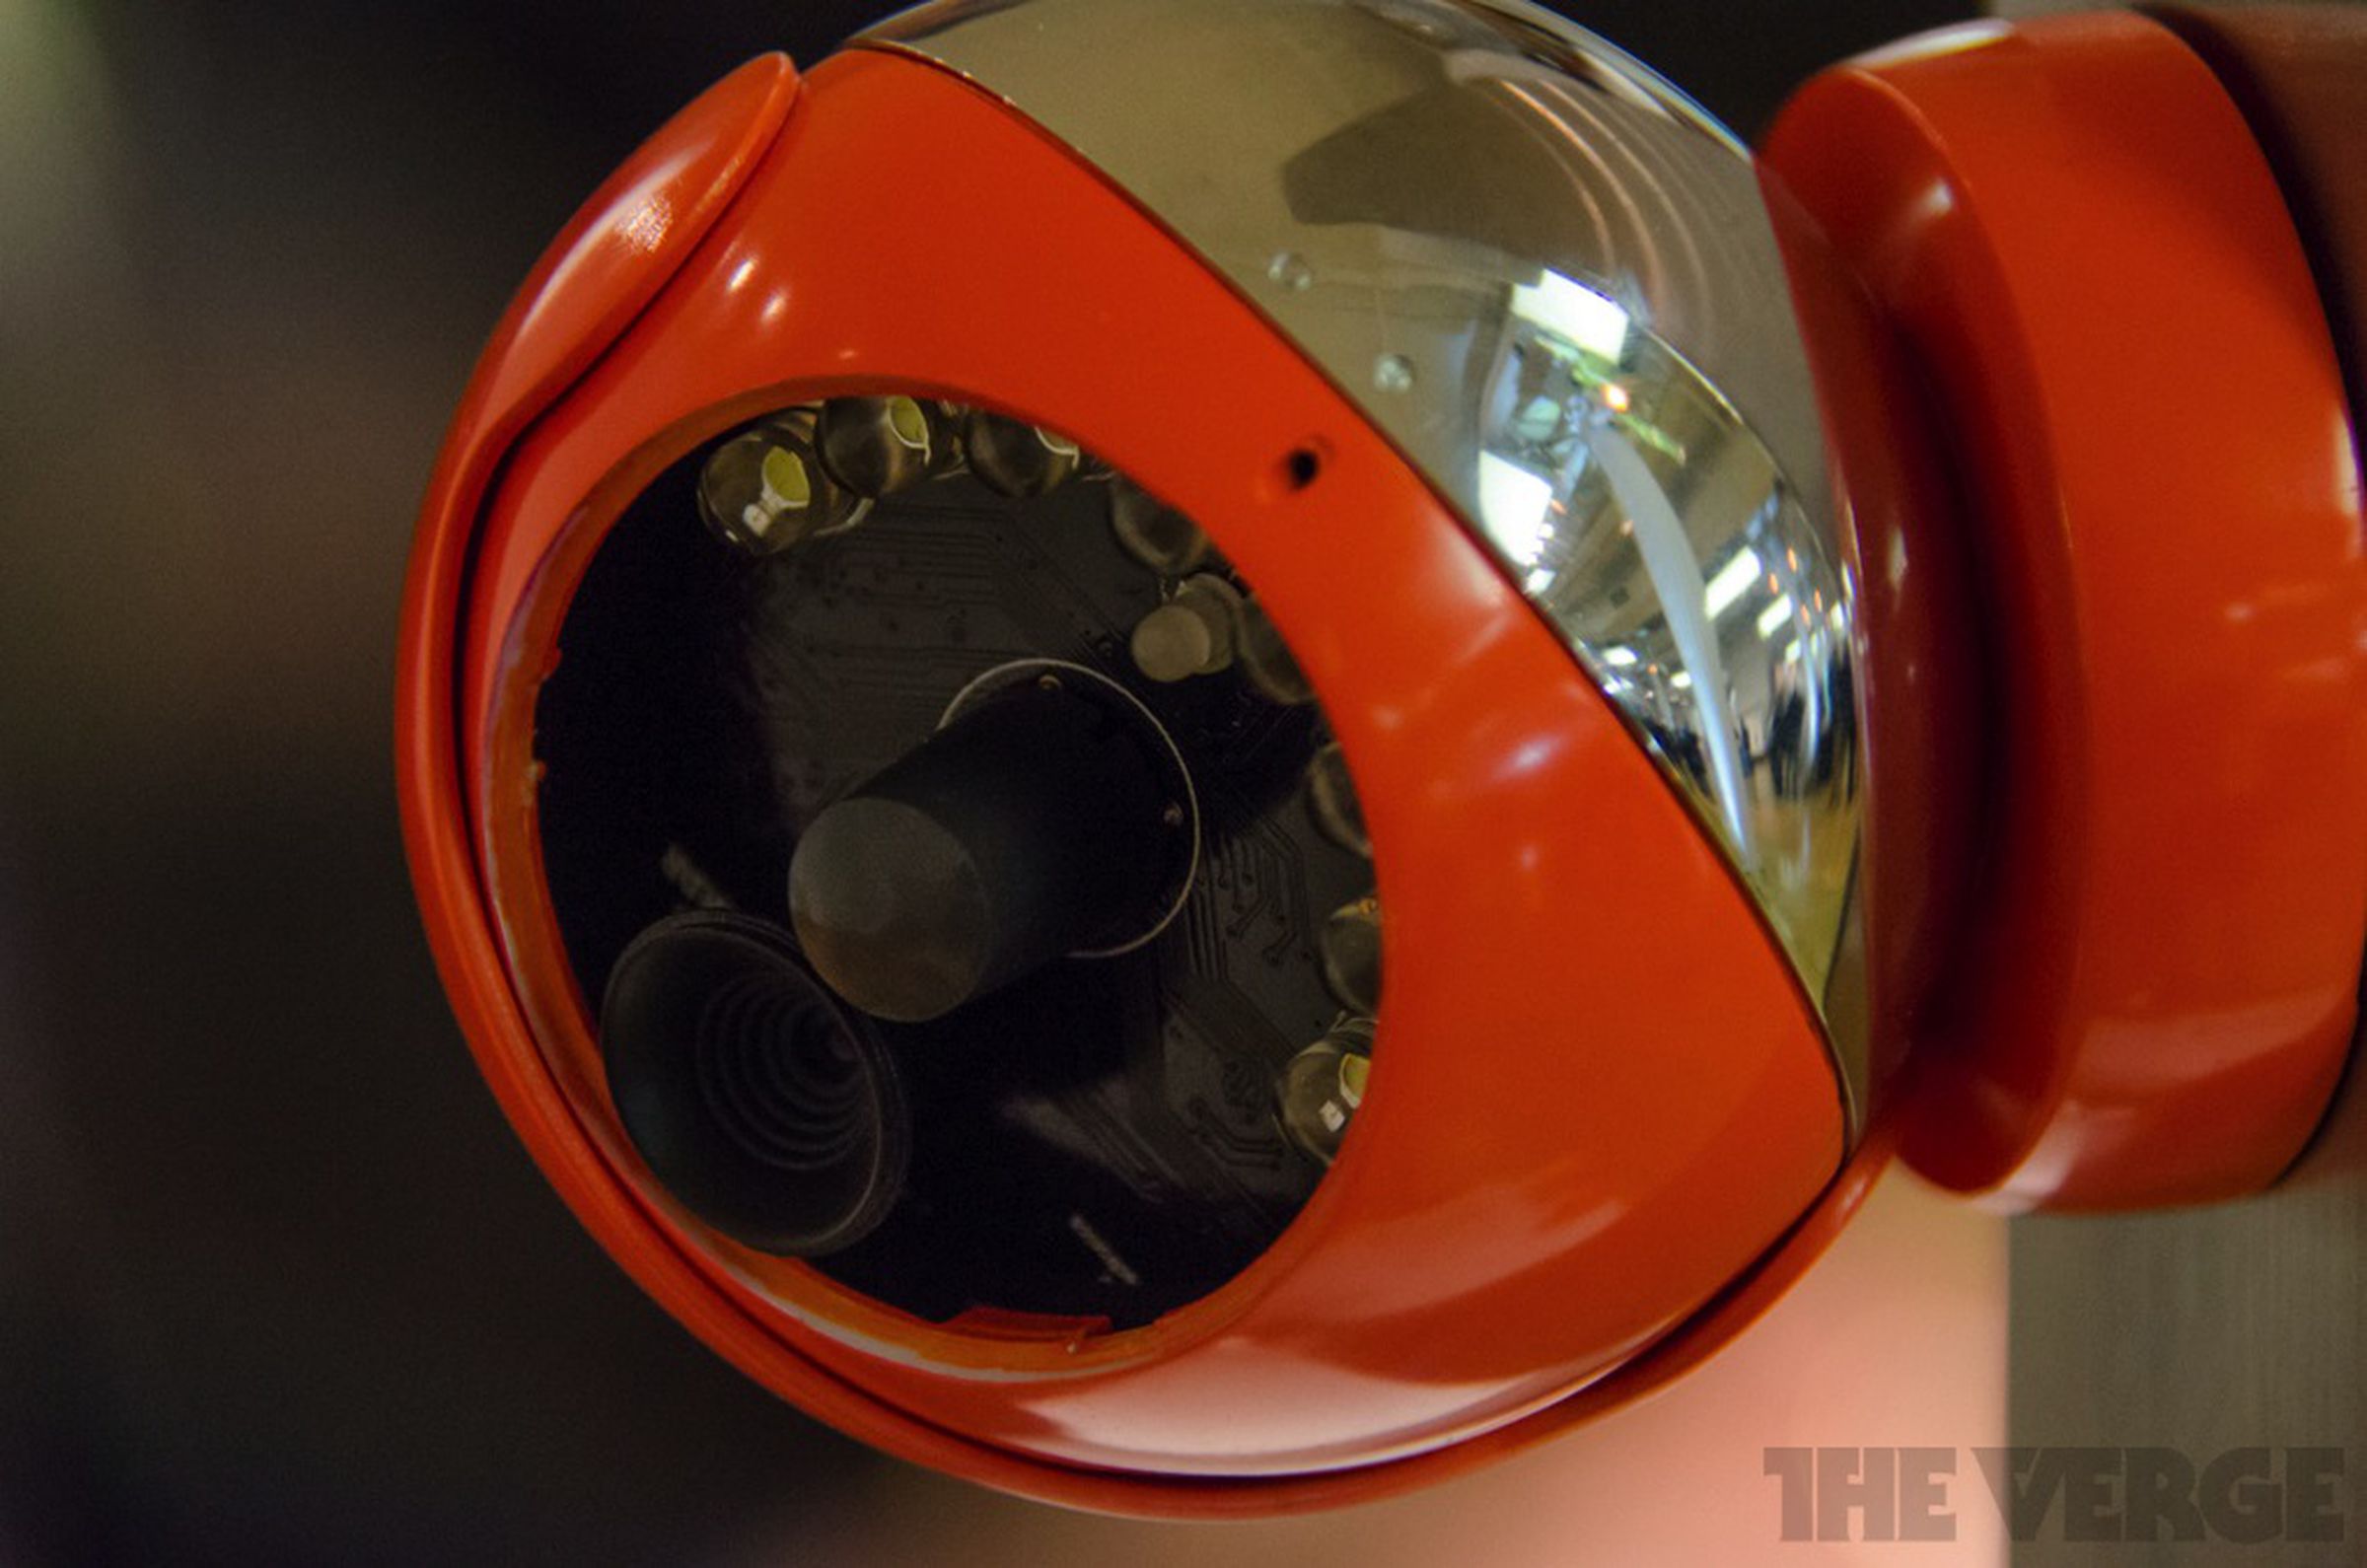 Hive security camera system hands-on photos